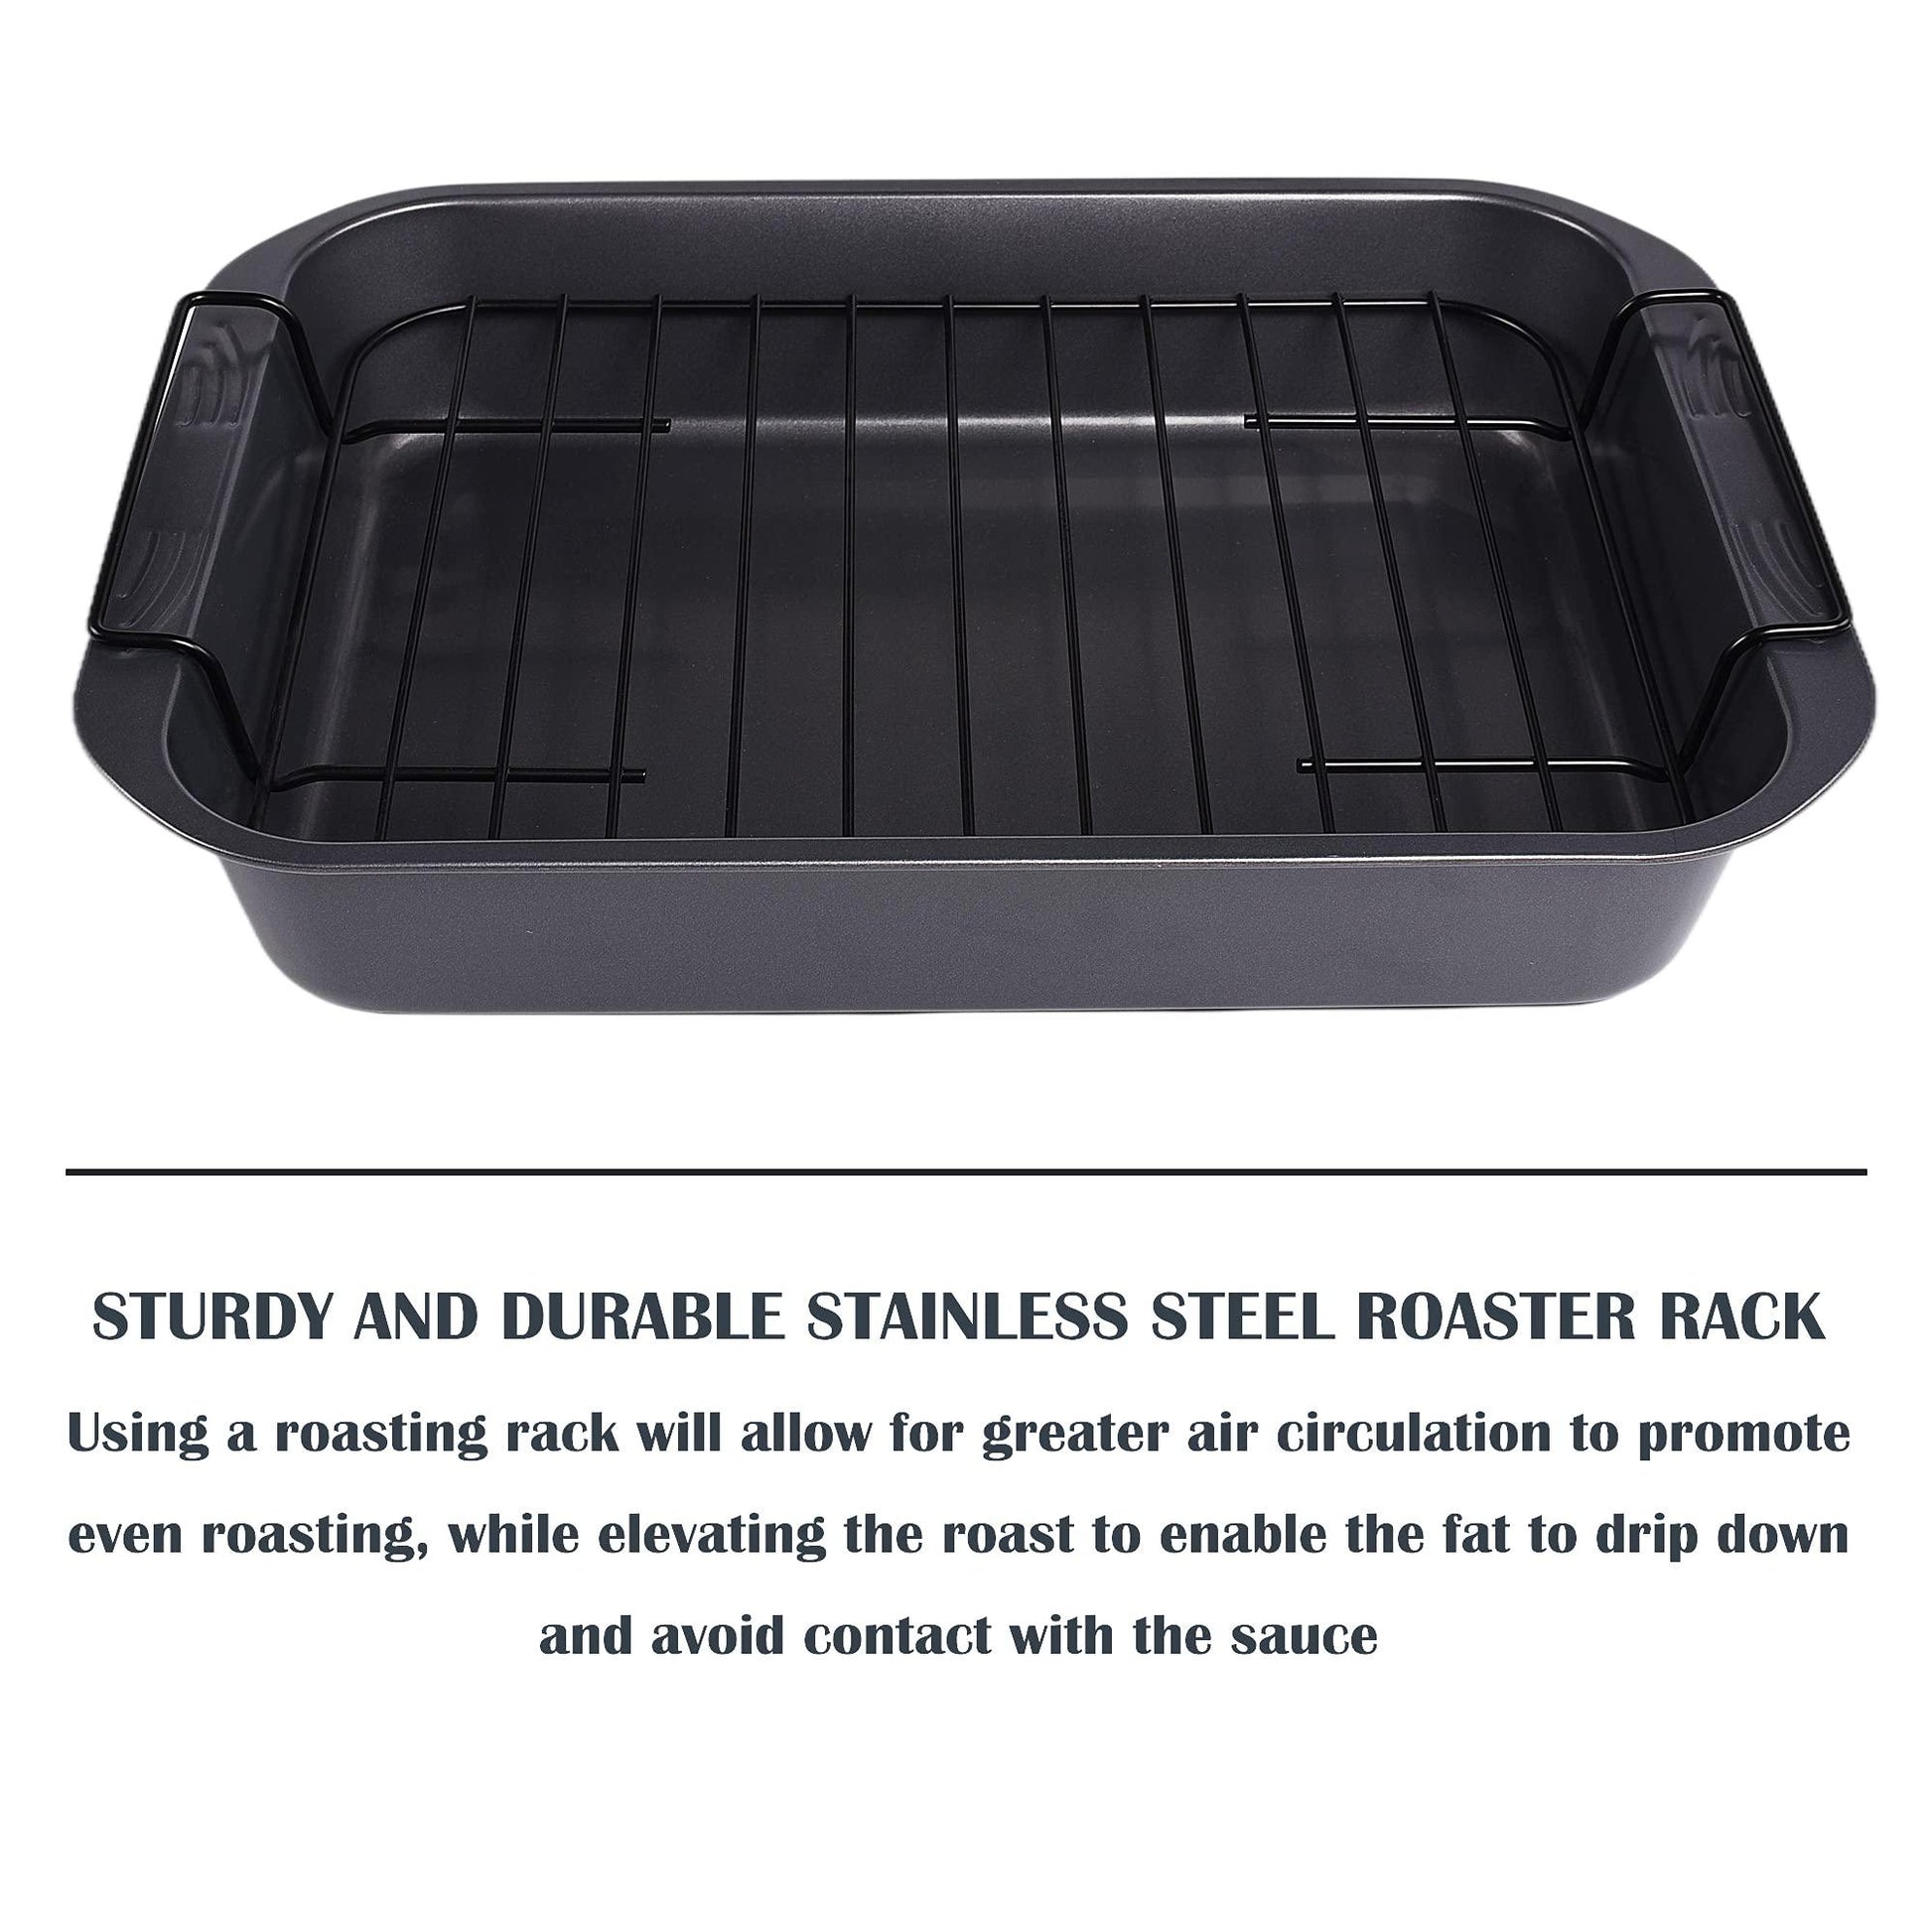 kitCom Bakeware Nonstick Roaster, Nonstick Roasting Pan with Rack, Great For Roast Chicken, Roasts And Turkeys - 15 Inch x 11 Inch (5.8 QT), Gray - CookCave